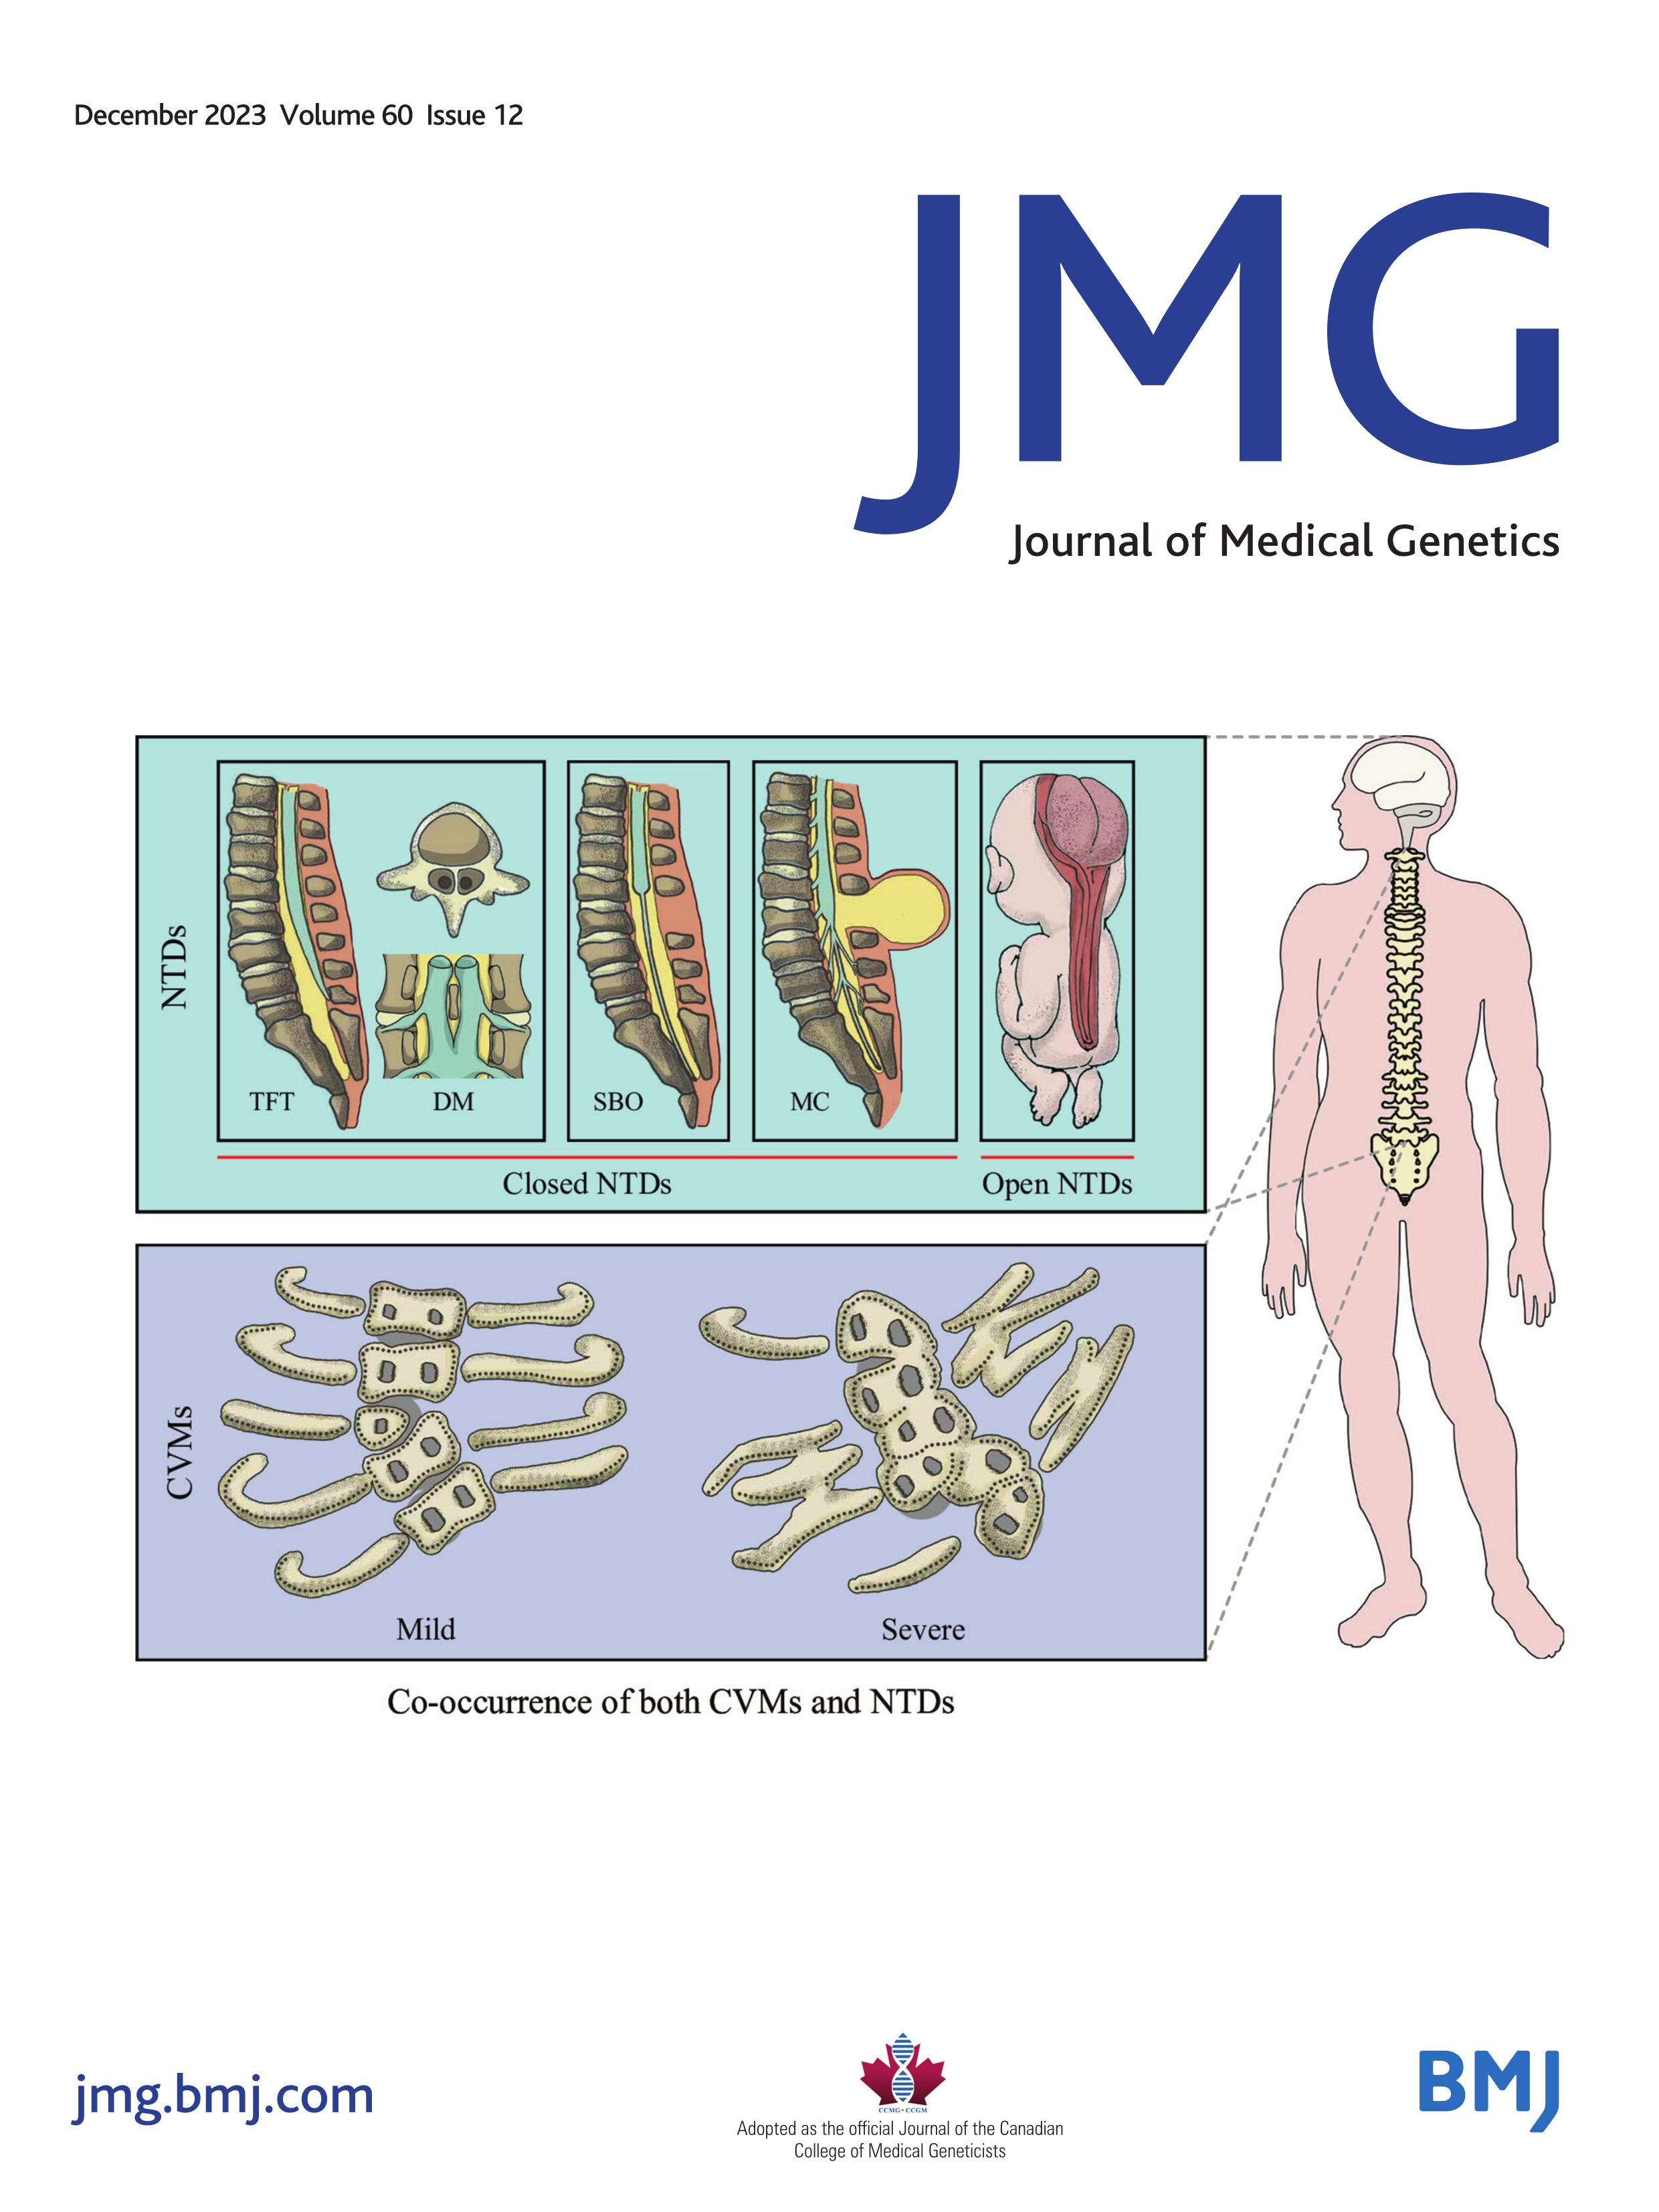 Genetic features and kidney morphological changes in women with X-linked Alport syndrome